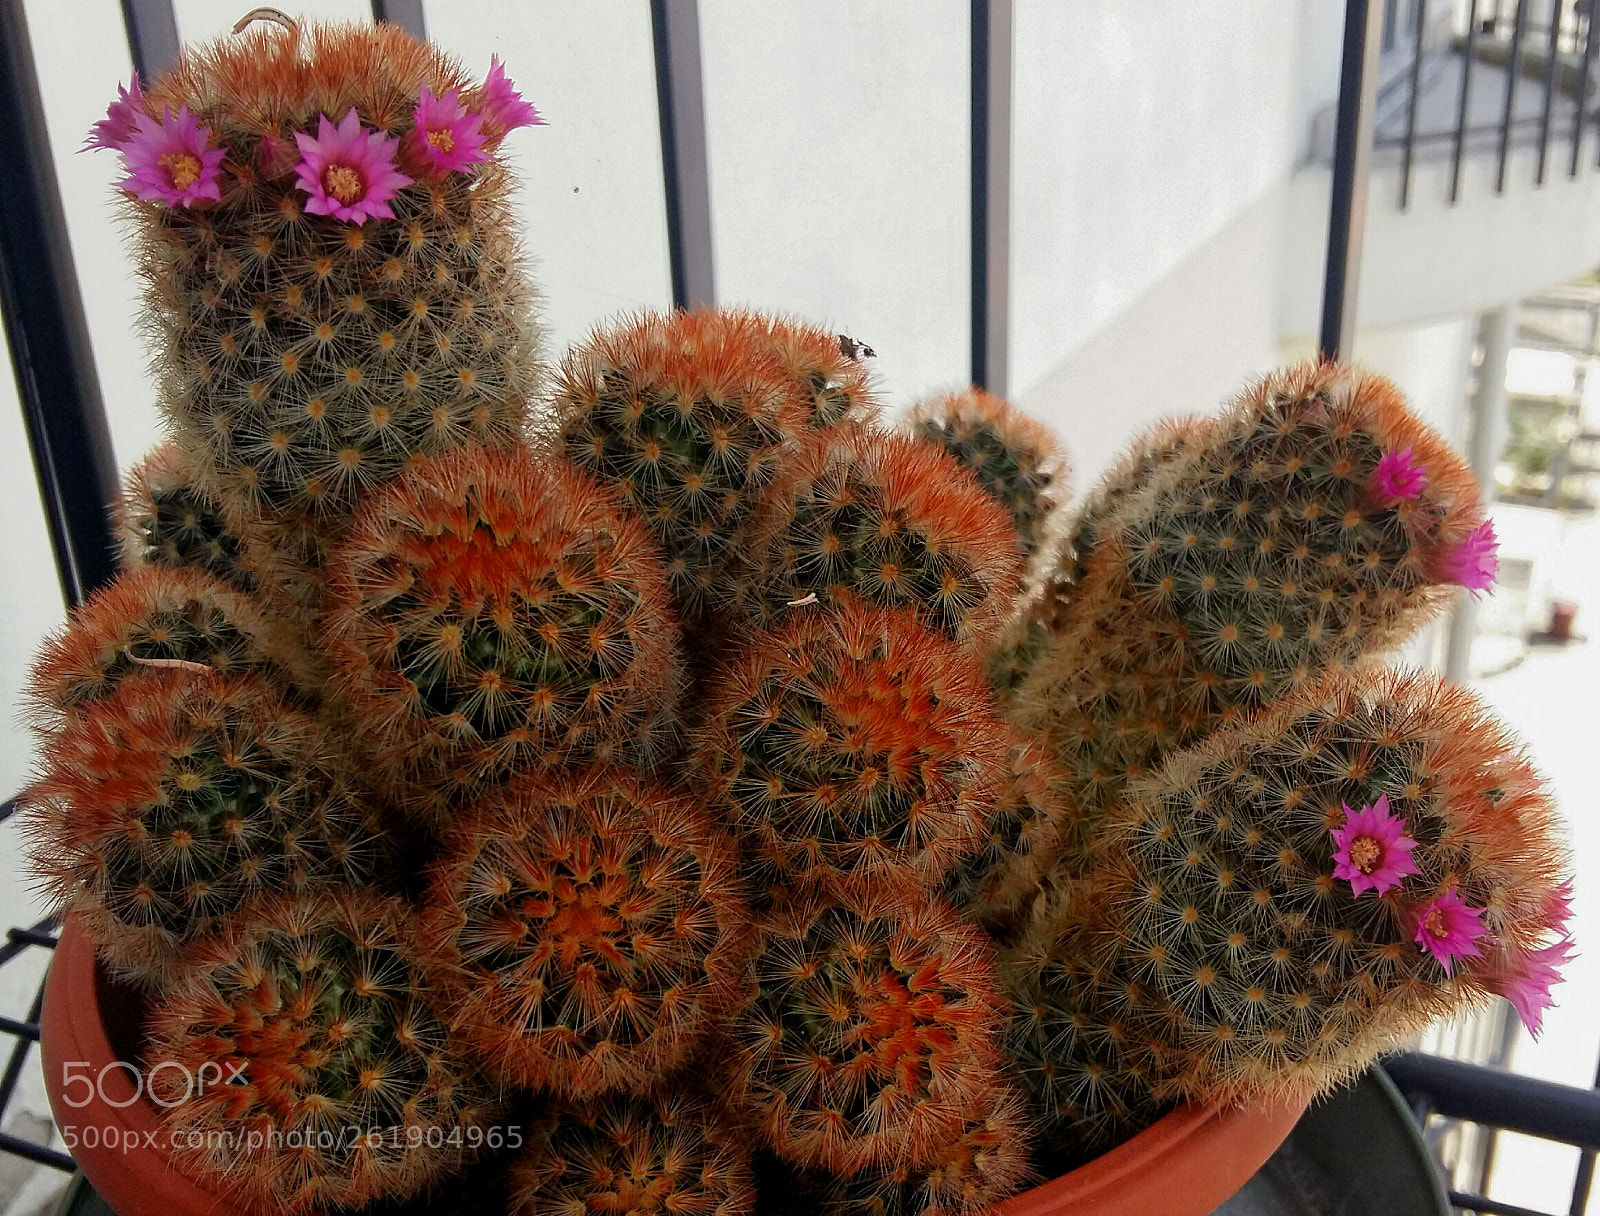 Samsung Galaxy A5 sample photo. Homegrown cactus in bloom photography